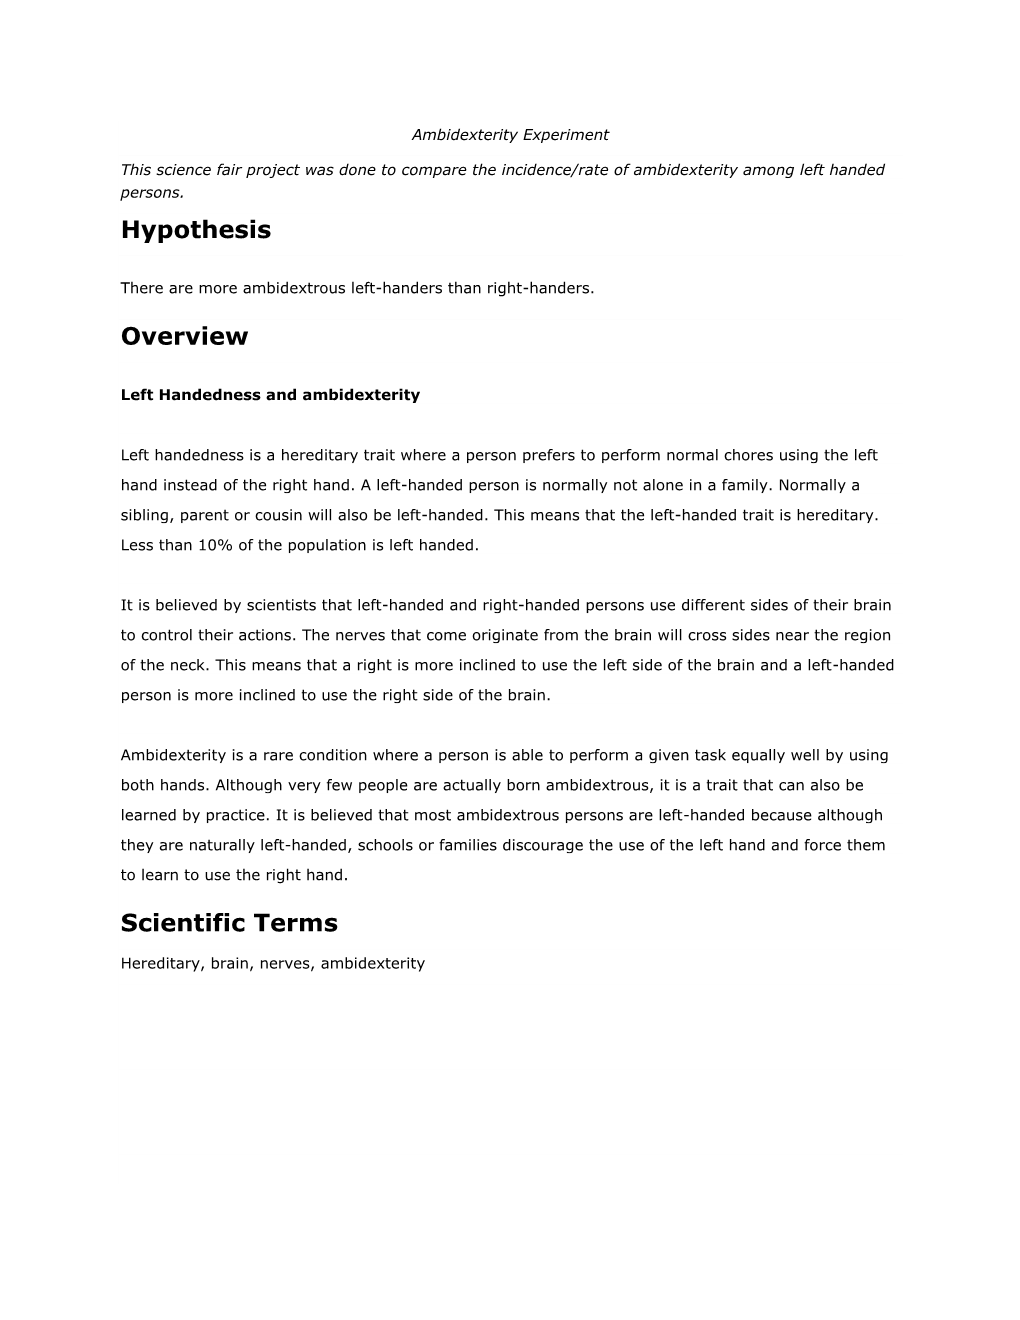 Hypothesis Overview Scientific Terms